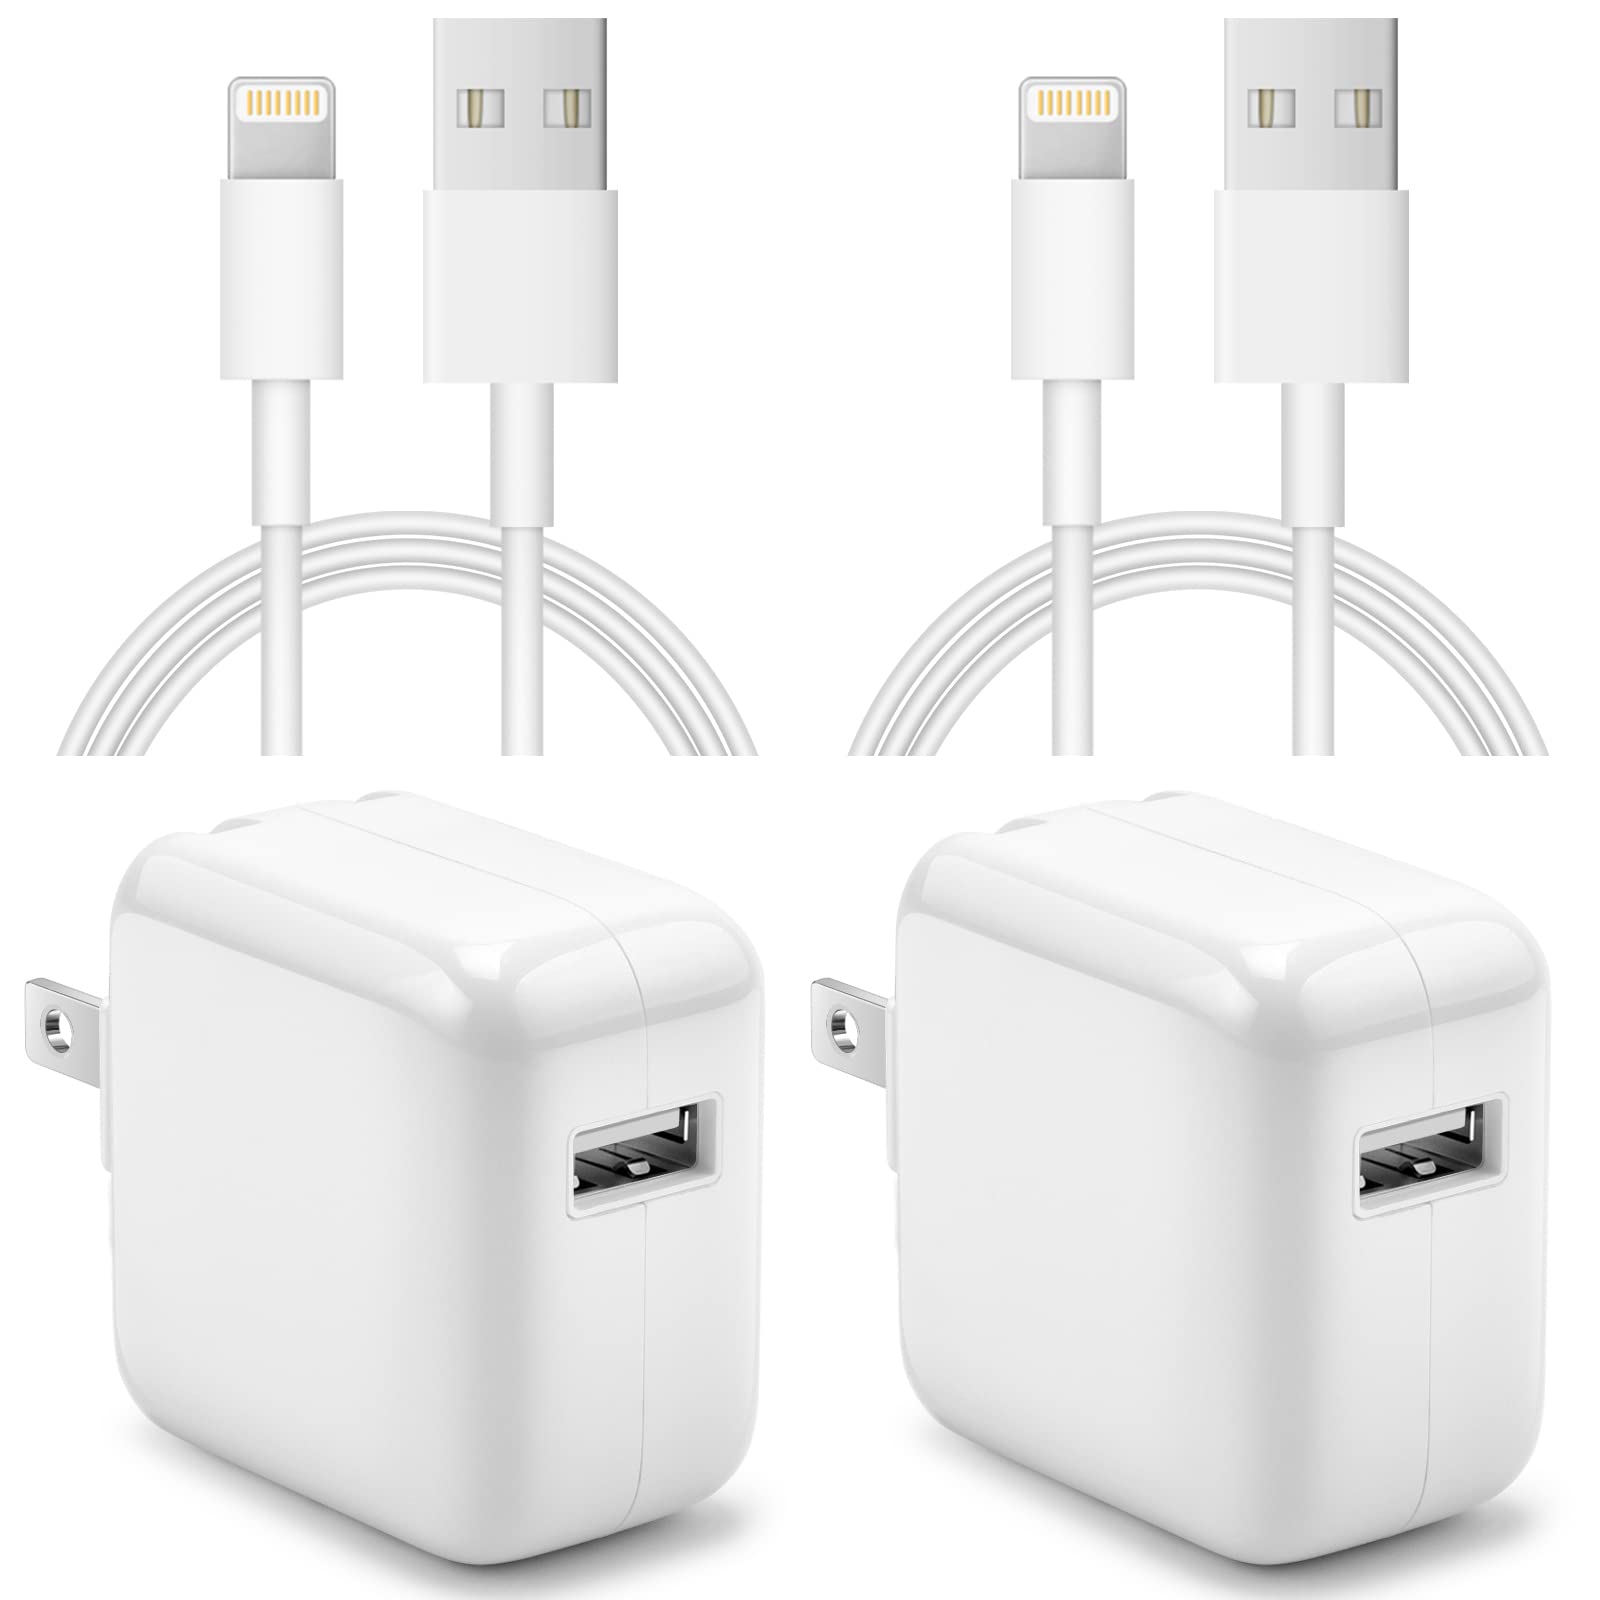 Mua iPad Charger iPhone Charger【Apple MFi Certified】 [2-Pack] 12W USB Wall  Charger Foldable Travel Plug Block with 6FT USB Flat Ribbon Cable  Compatible with iPad iPhone, iPad, Airpod trên Amazon Mỹ chính